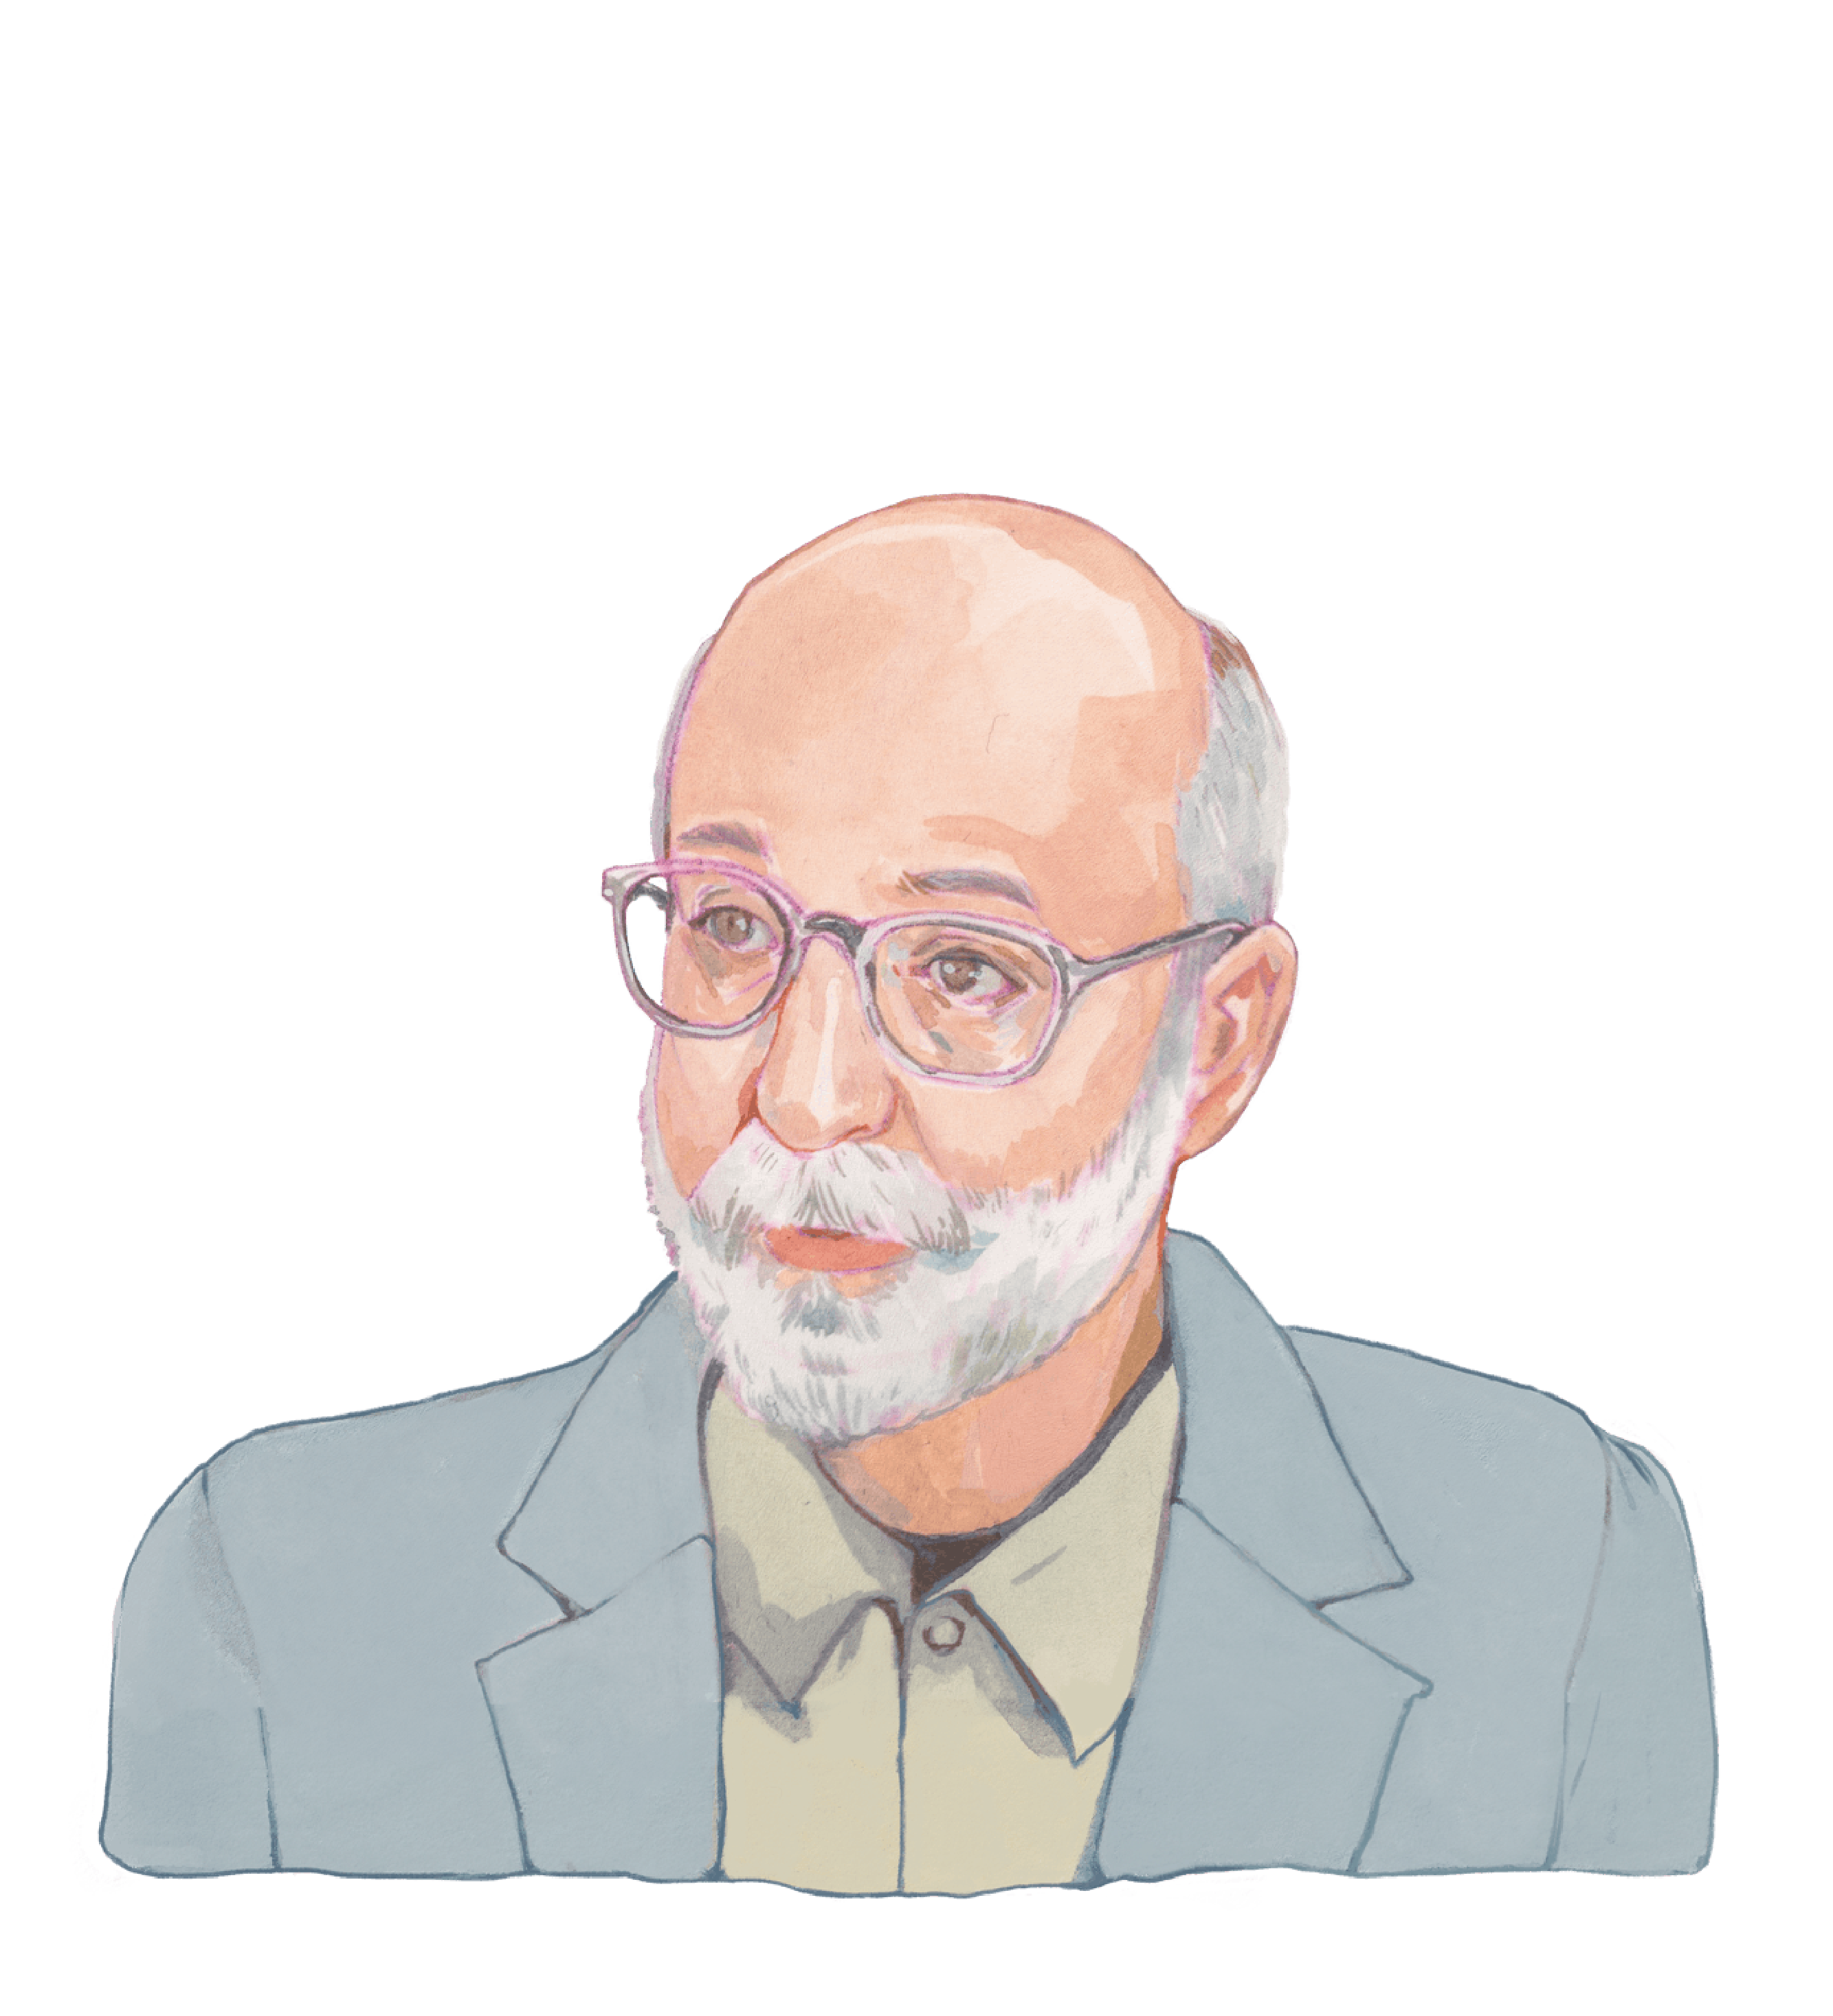 Color illustration of Jeffrey A. Butts, a person with a light skin tone wearing a gray suit jacket and open collar tan shirt. They wear eyeglasses and are partially bald with silver sides, a short white beard, and a pensive expression on their face.